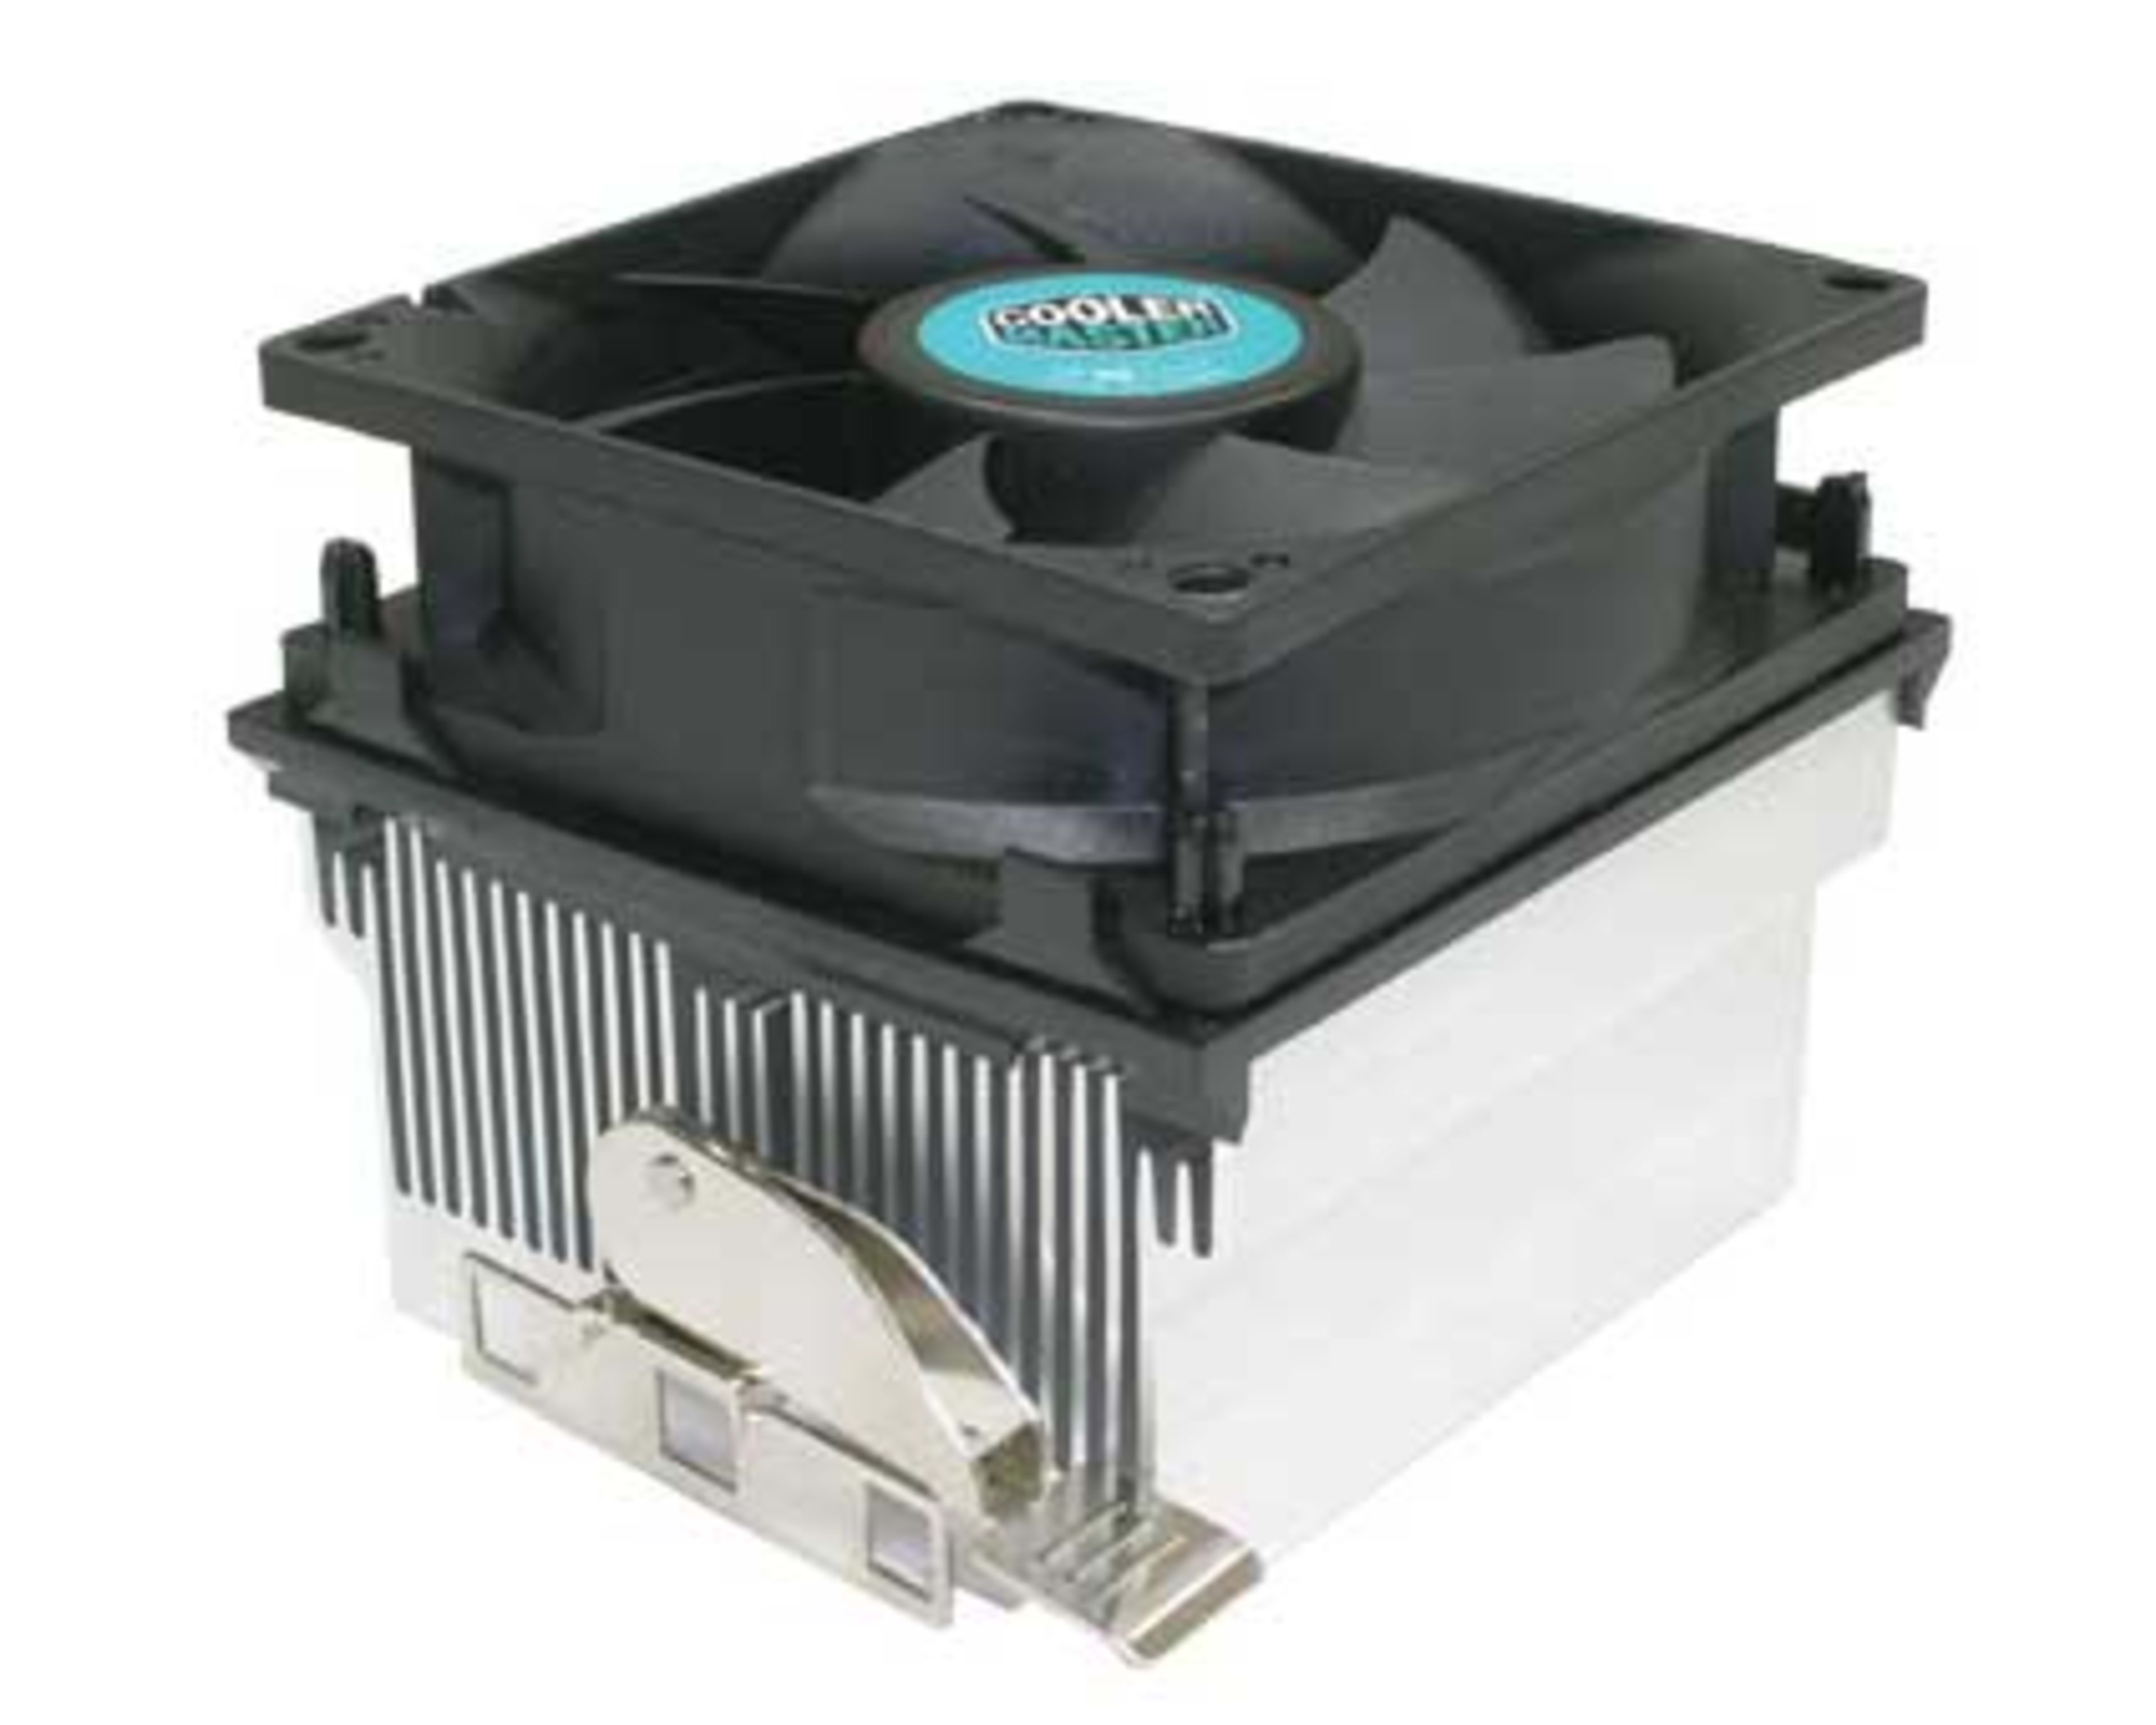 Pre-owned Cooler Master DK8-8I32A-99 Althon64 AM2, AM3 Cooling Fan 754 940 939, AM2 up to 60W